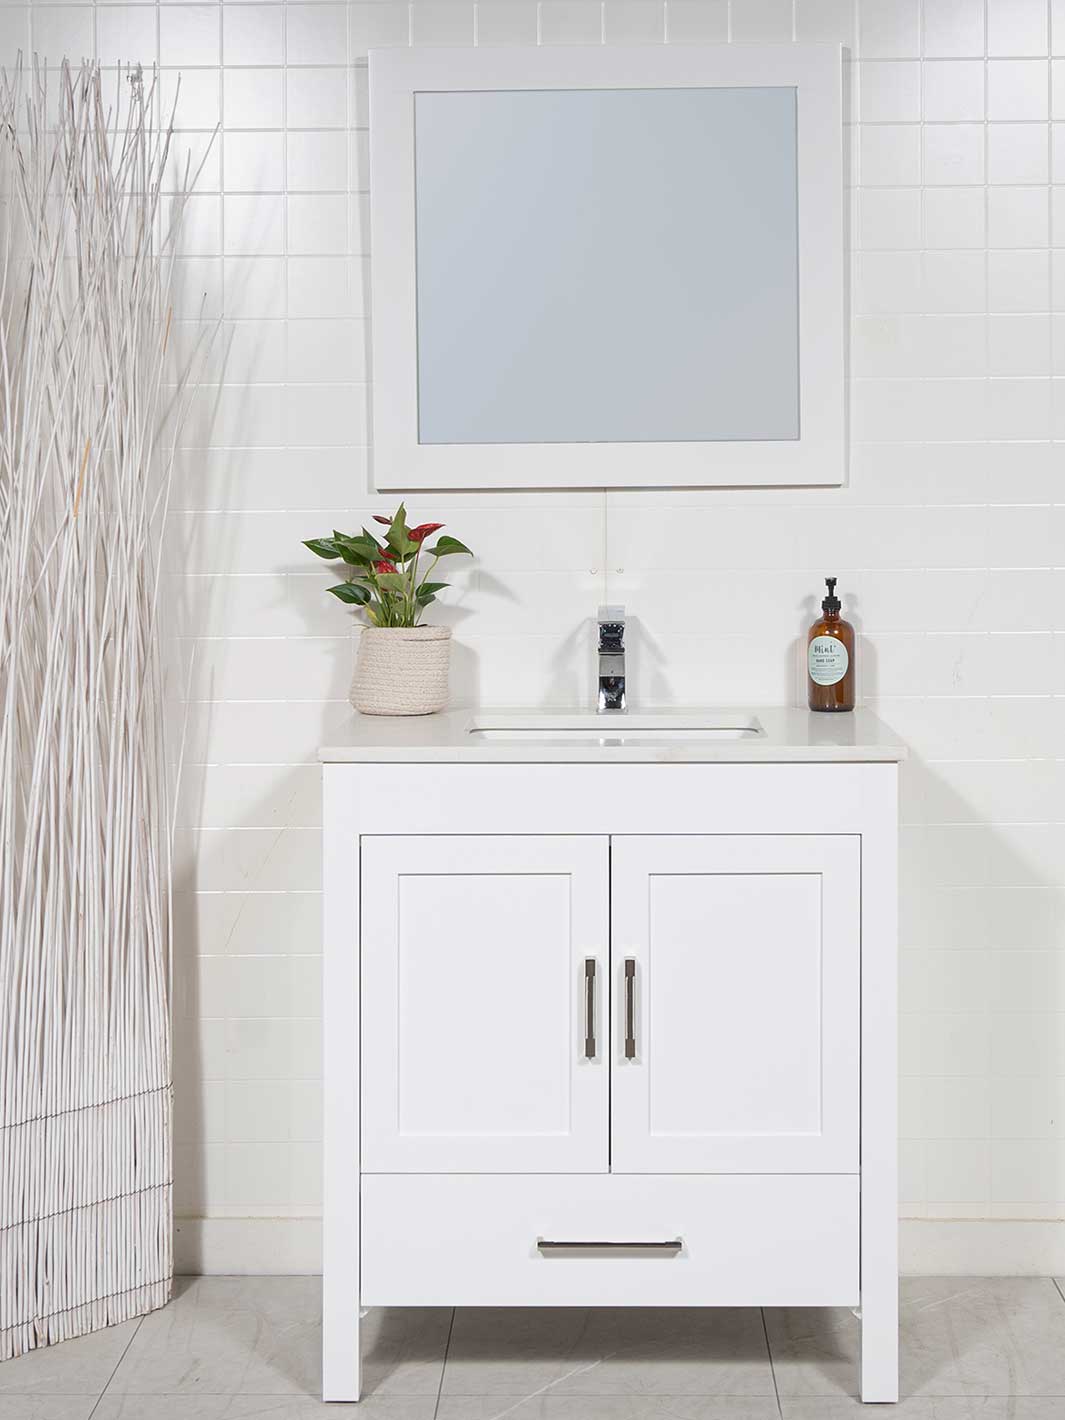 32 inch white bathroom vanity with quartz counter, chrome faucet and white framed mirror